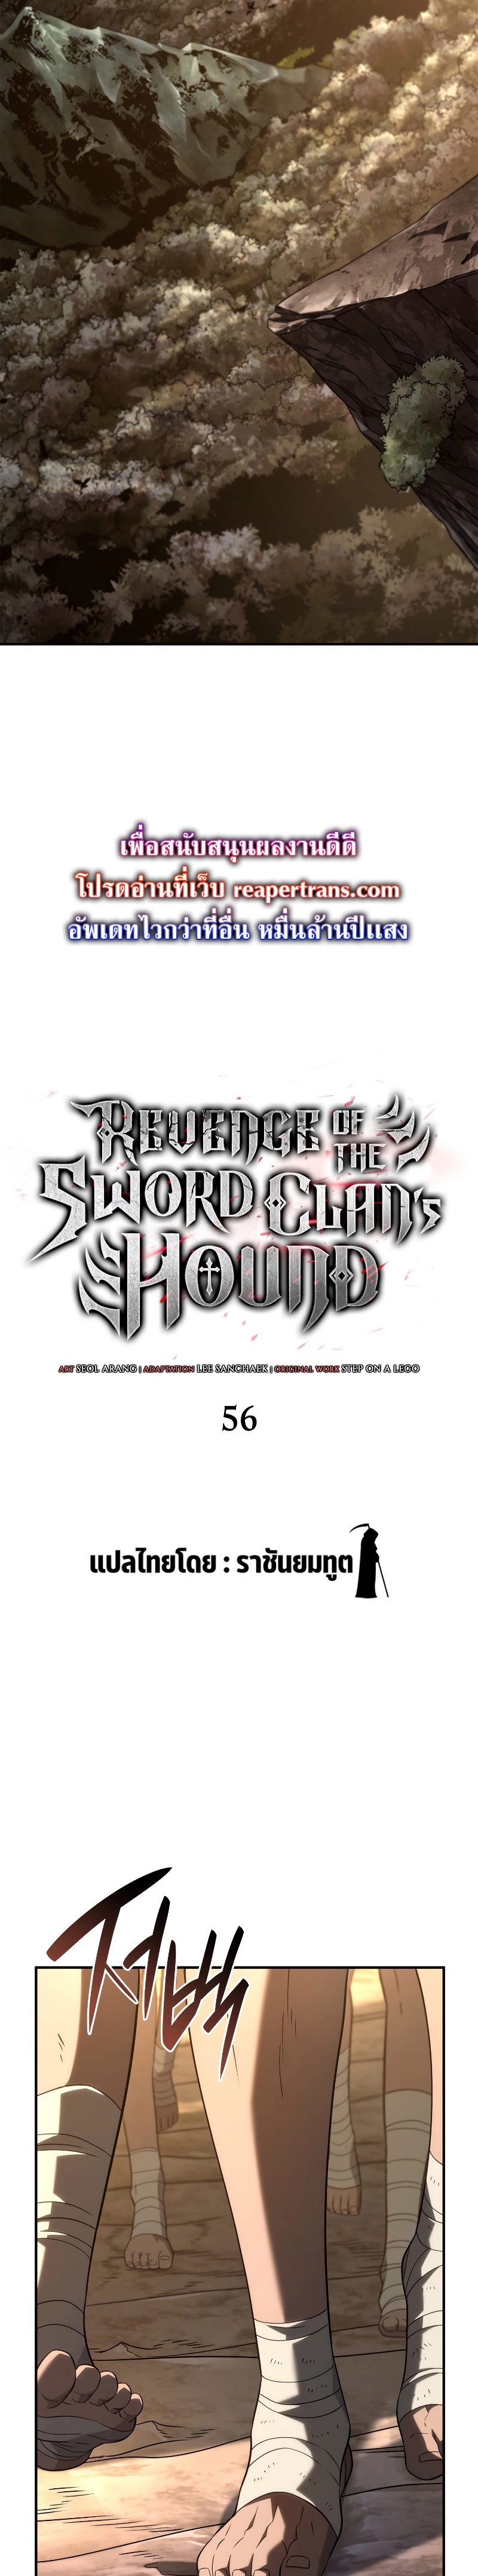 revenge of the iron blooded sword hound 56.16